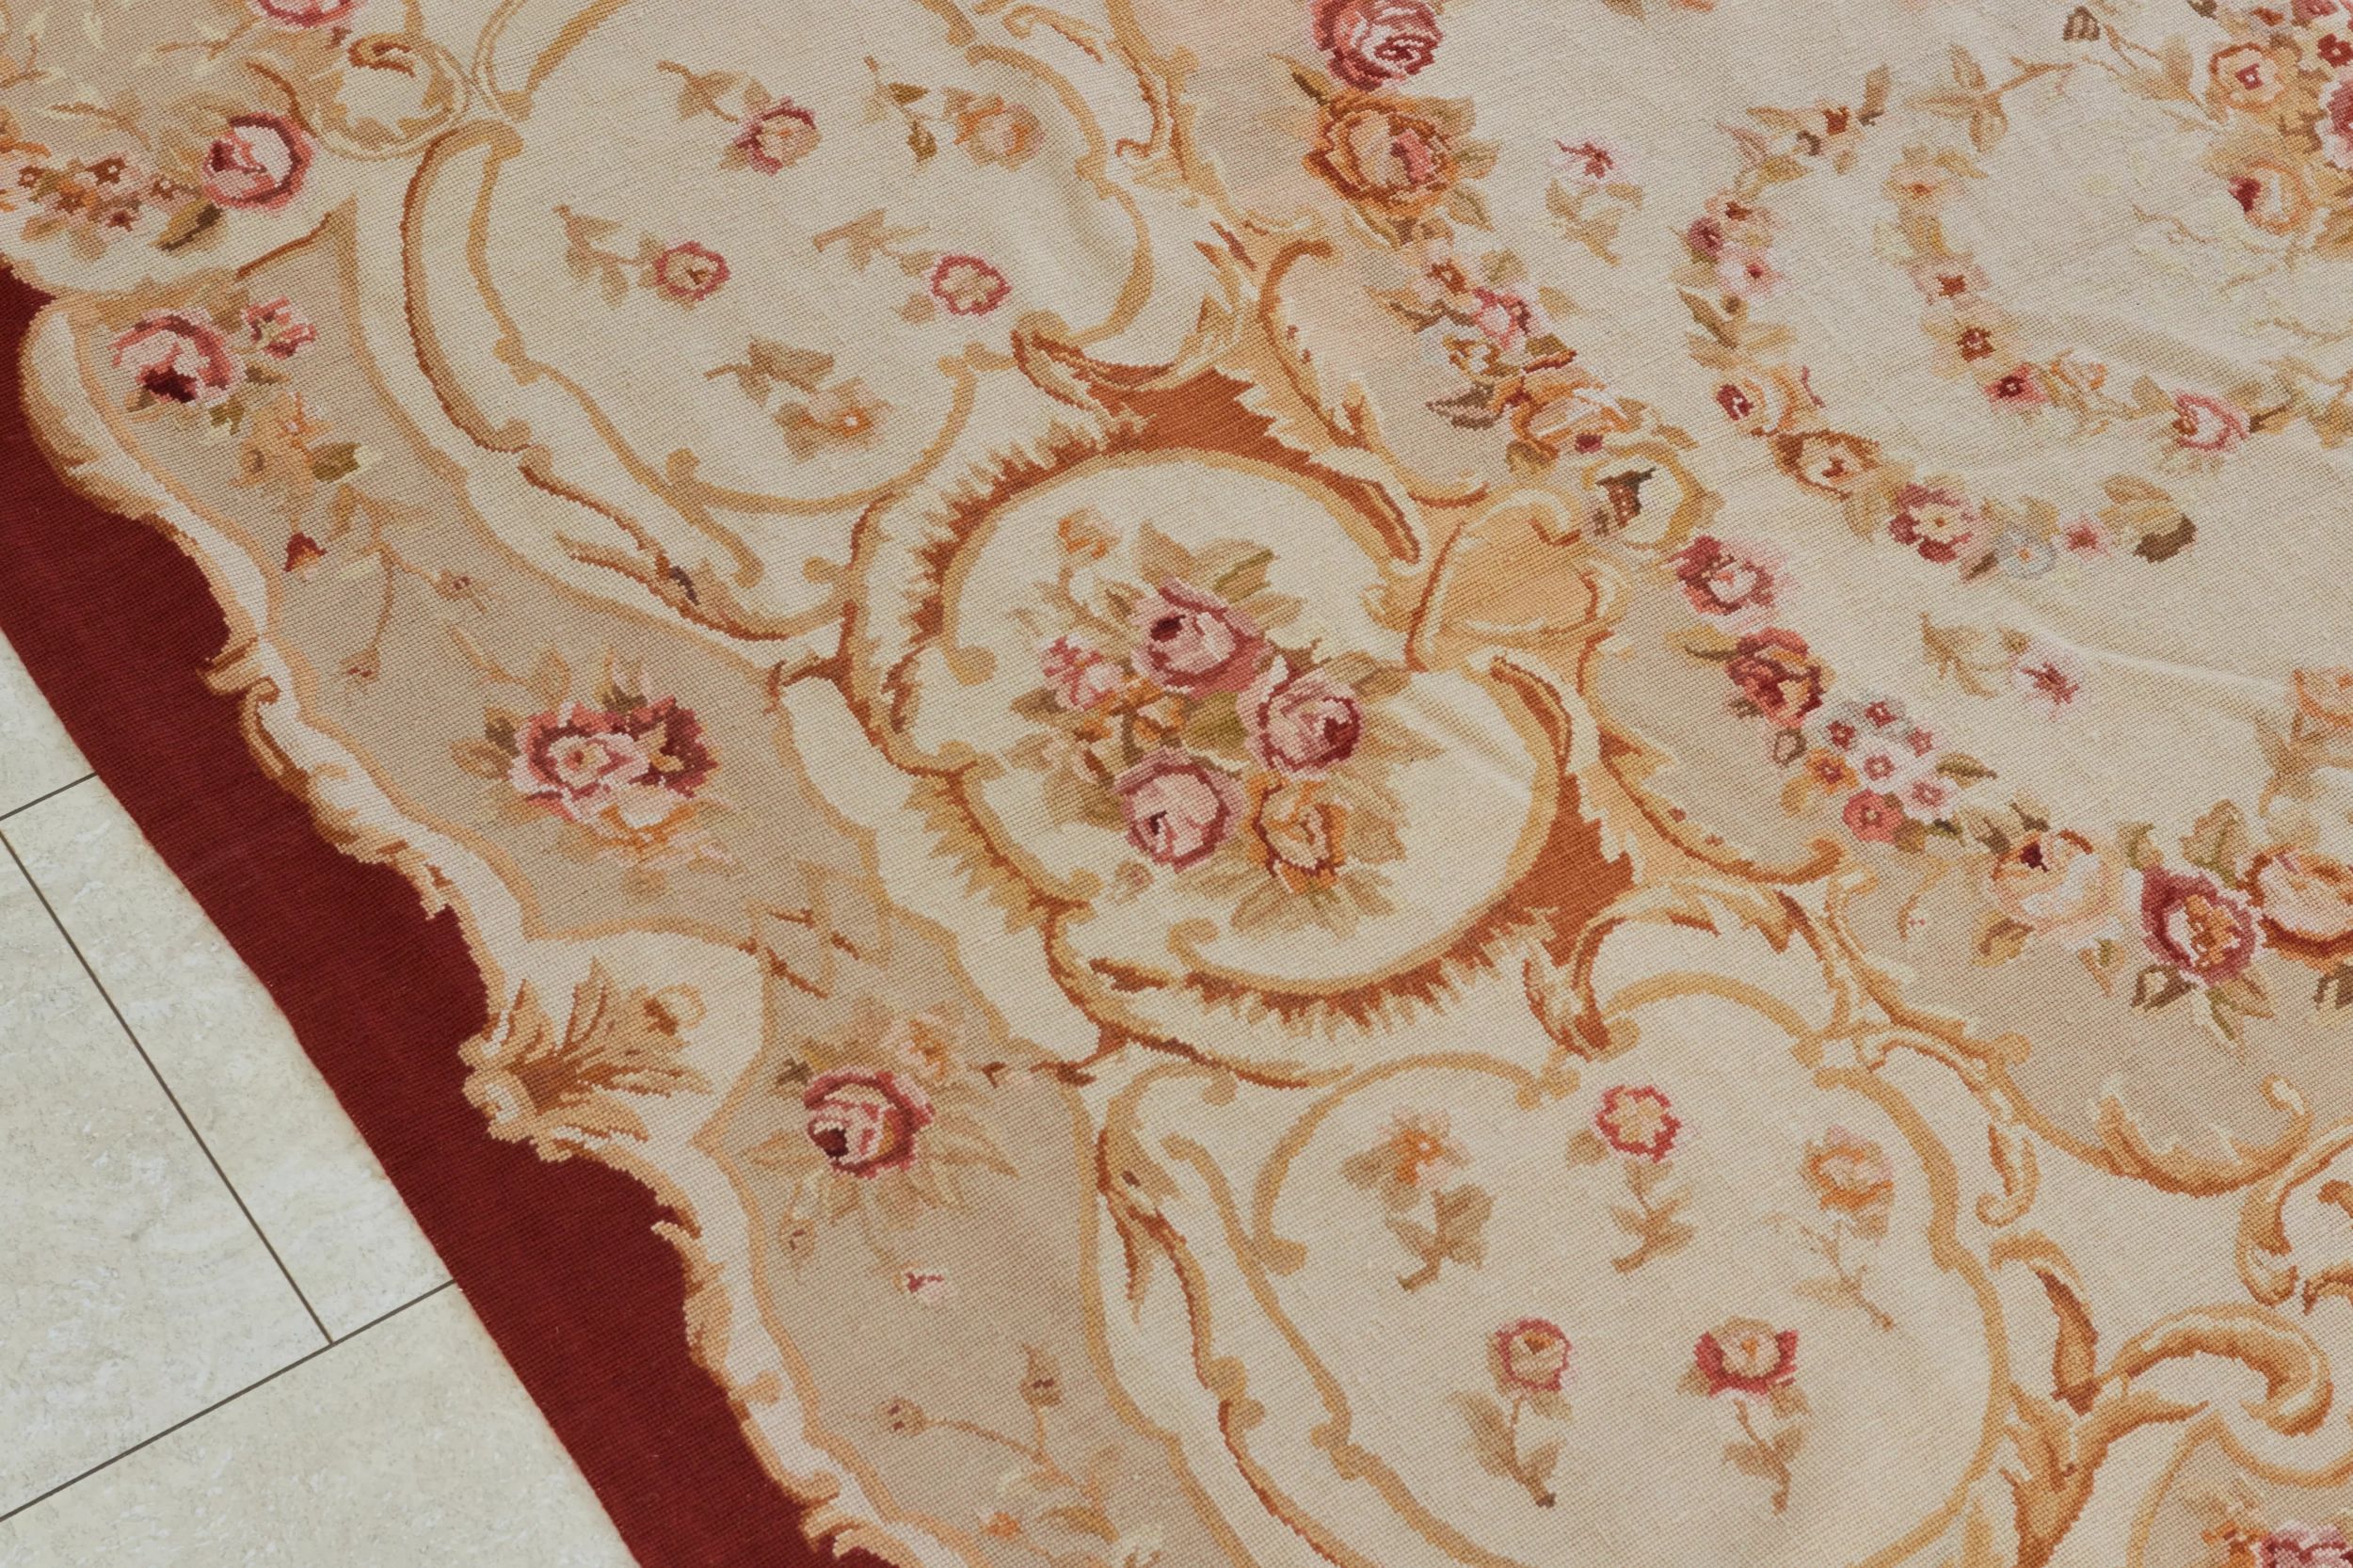 19th century French carpet in Aubusson style. - Image 4 of 8